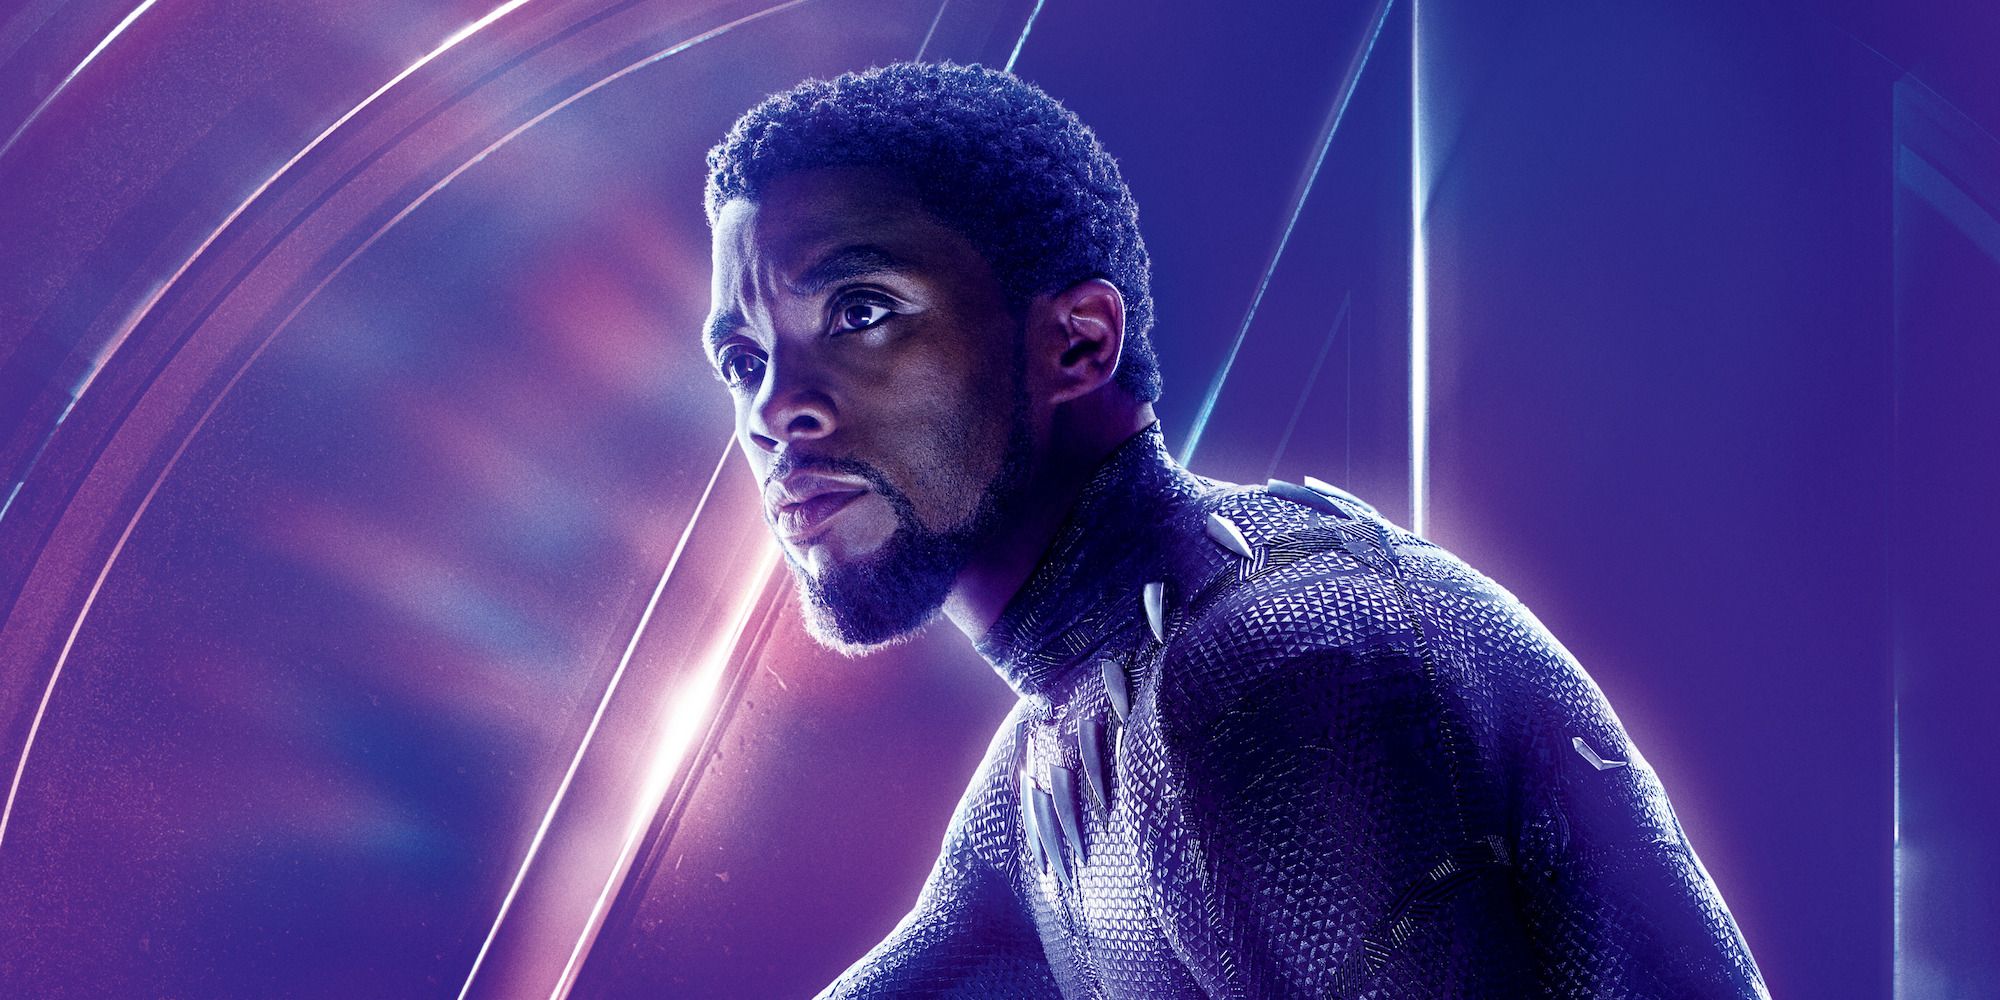 Chadwick Boseman as Black Panther without helmet on Avengers Endgame poster